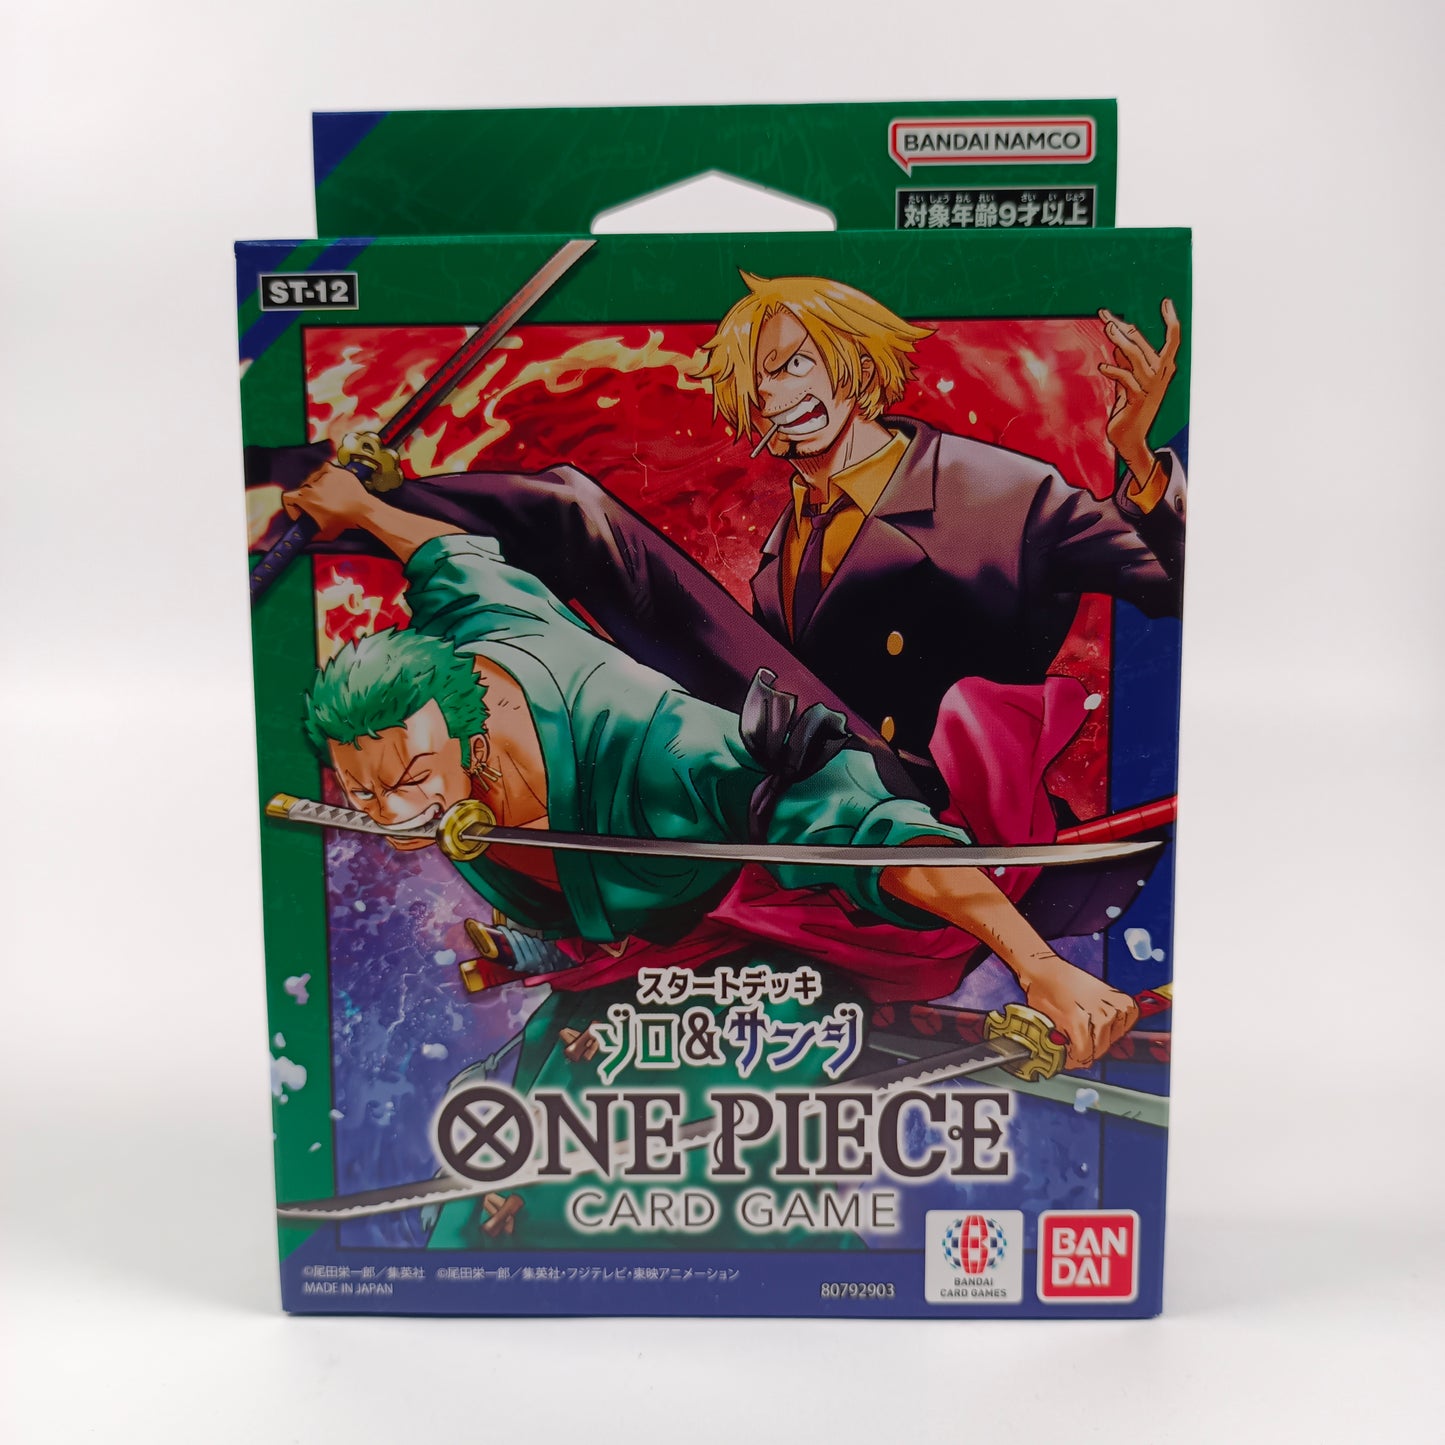 ONE PIECE CARD GAME ST-12